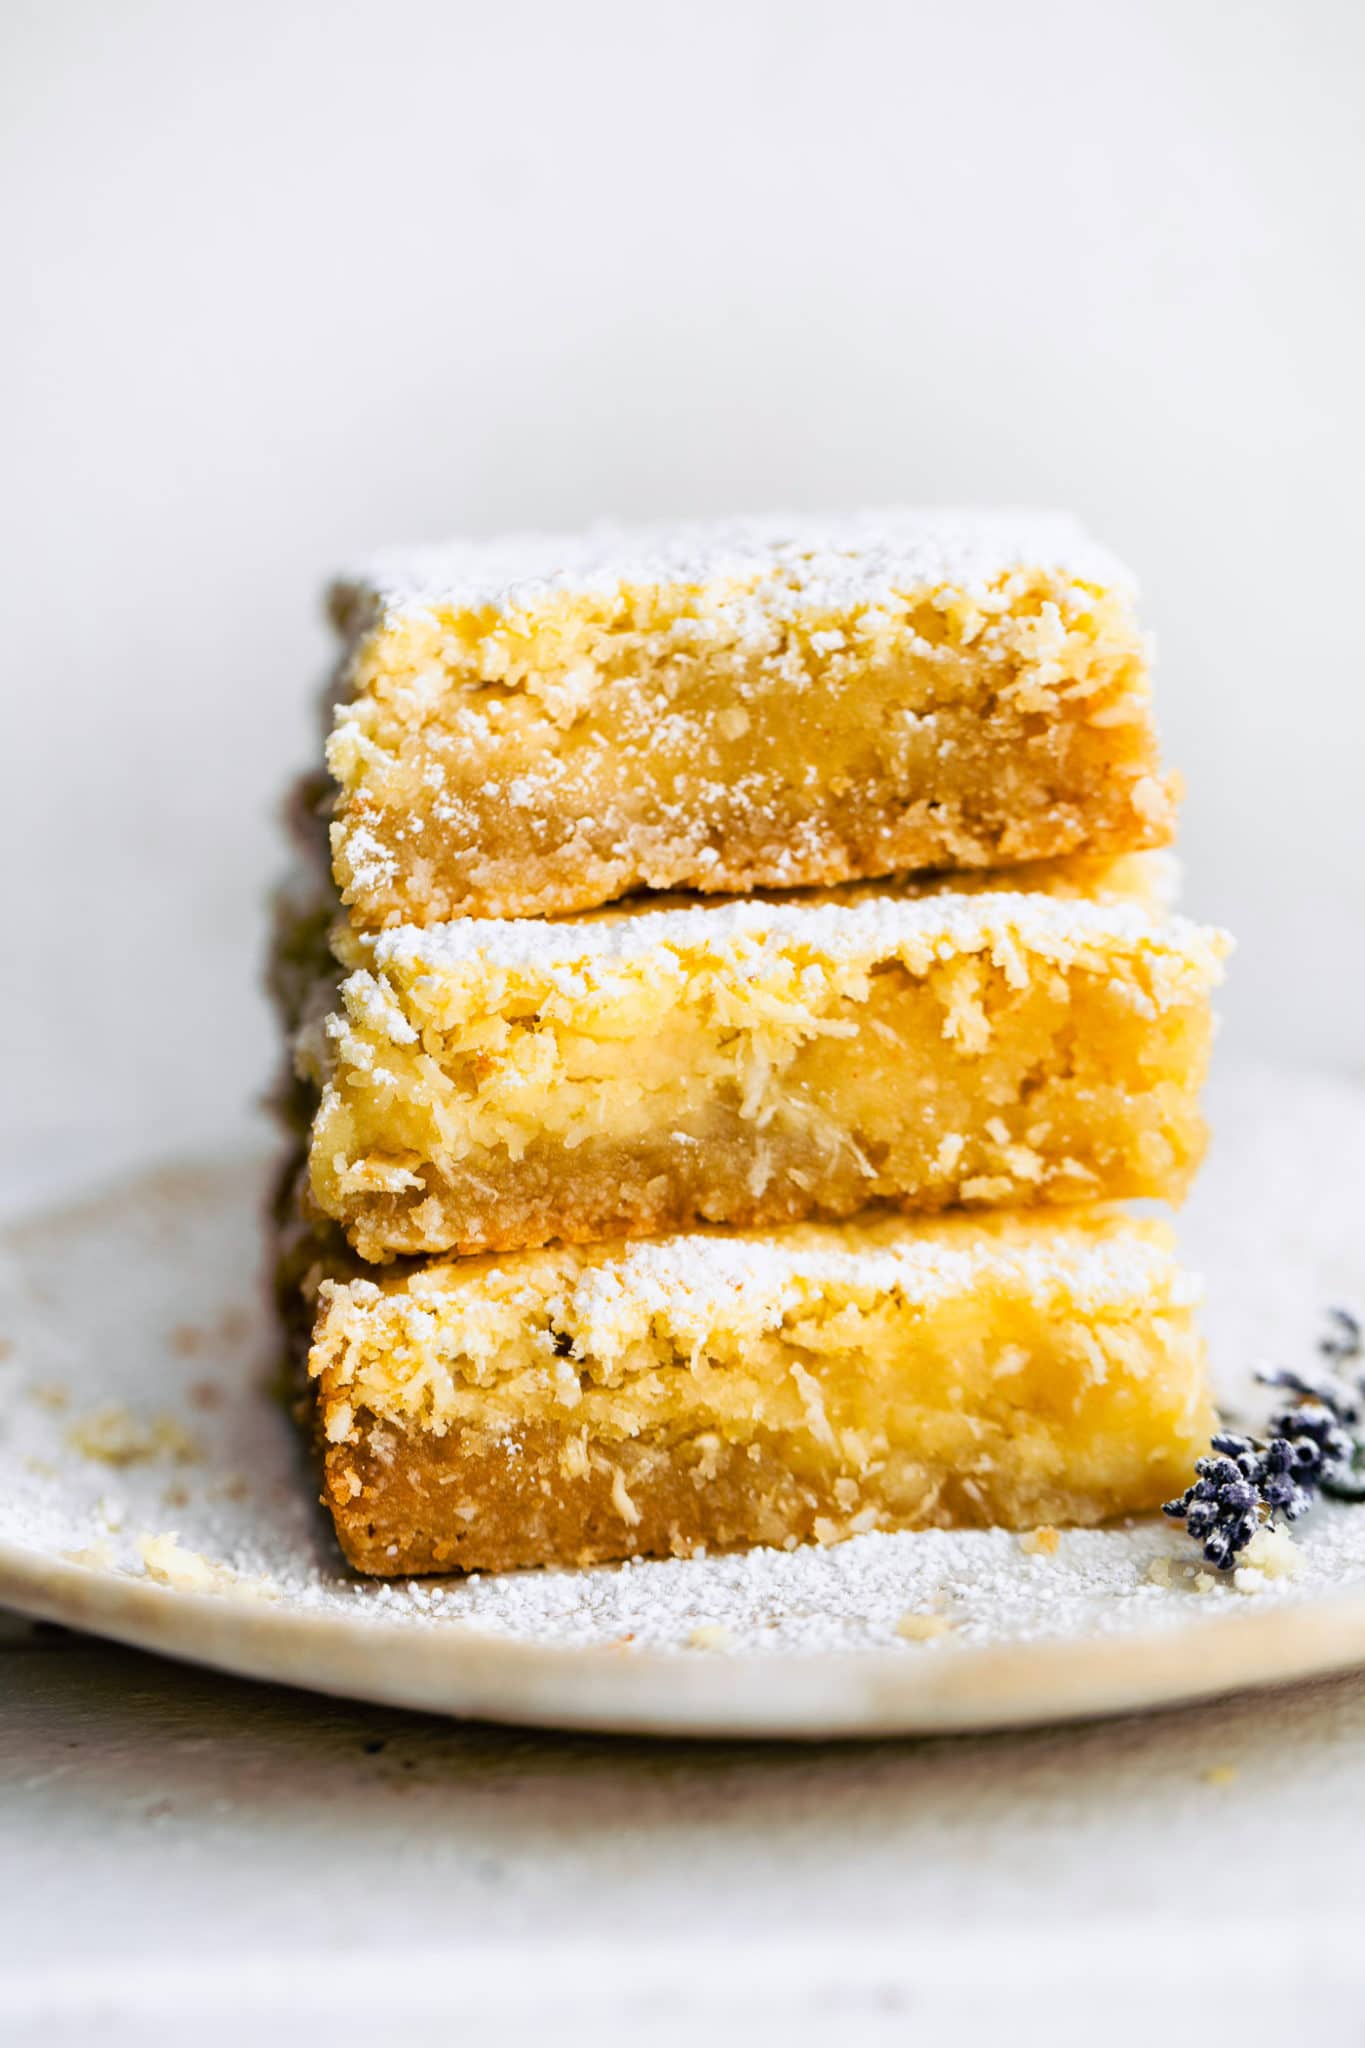 a stack of three gluten free lemon bars stacked on top of each other on a white plate with a sprig of lavendar on the side